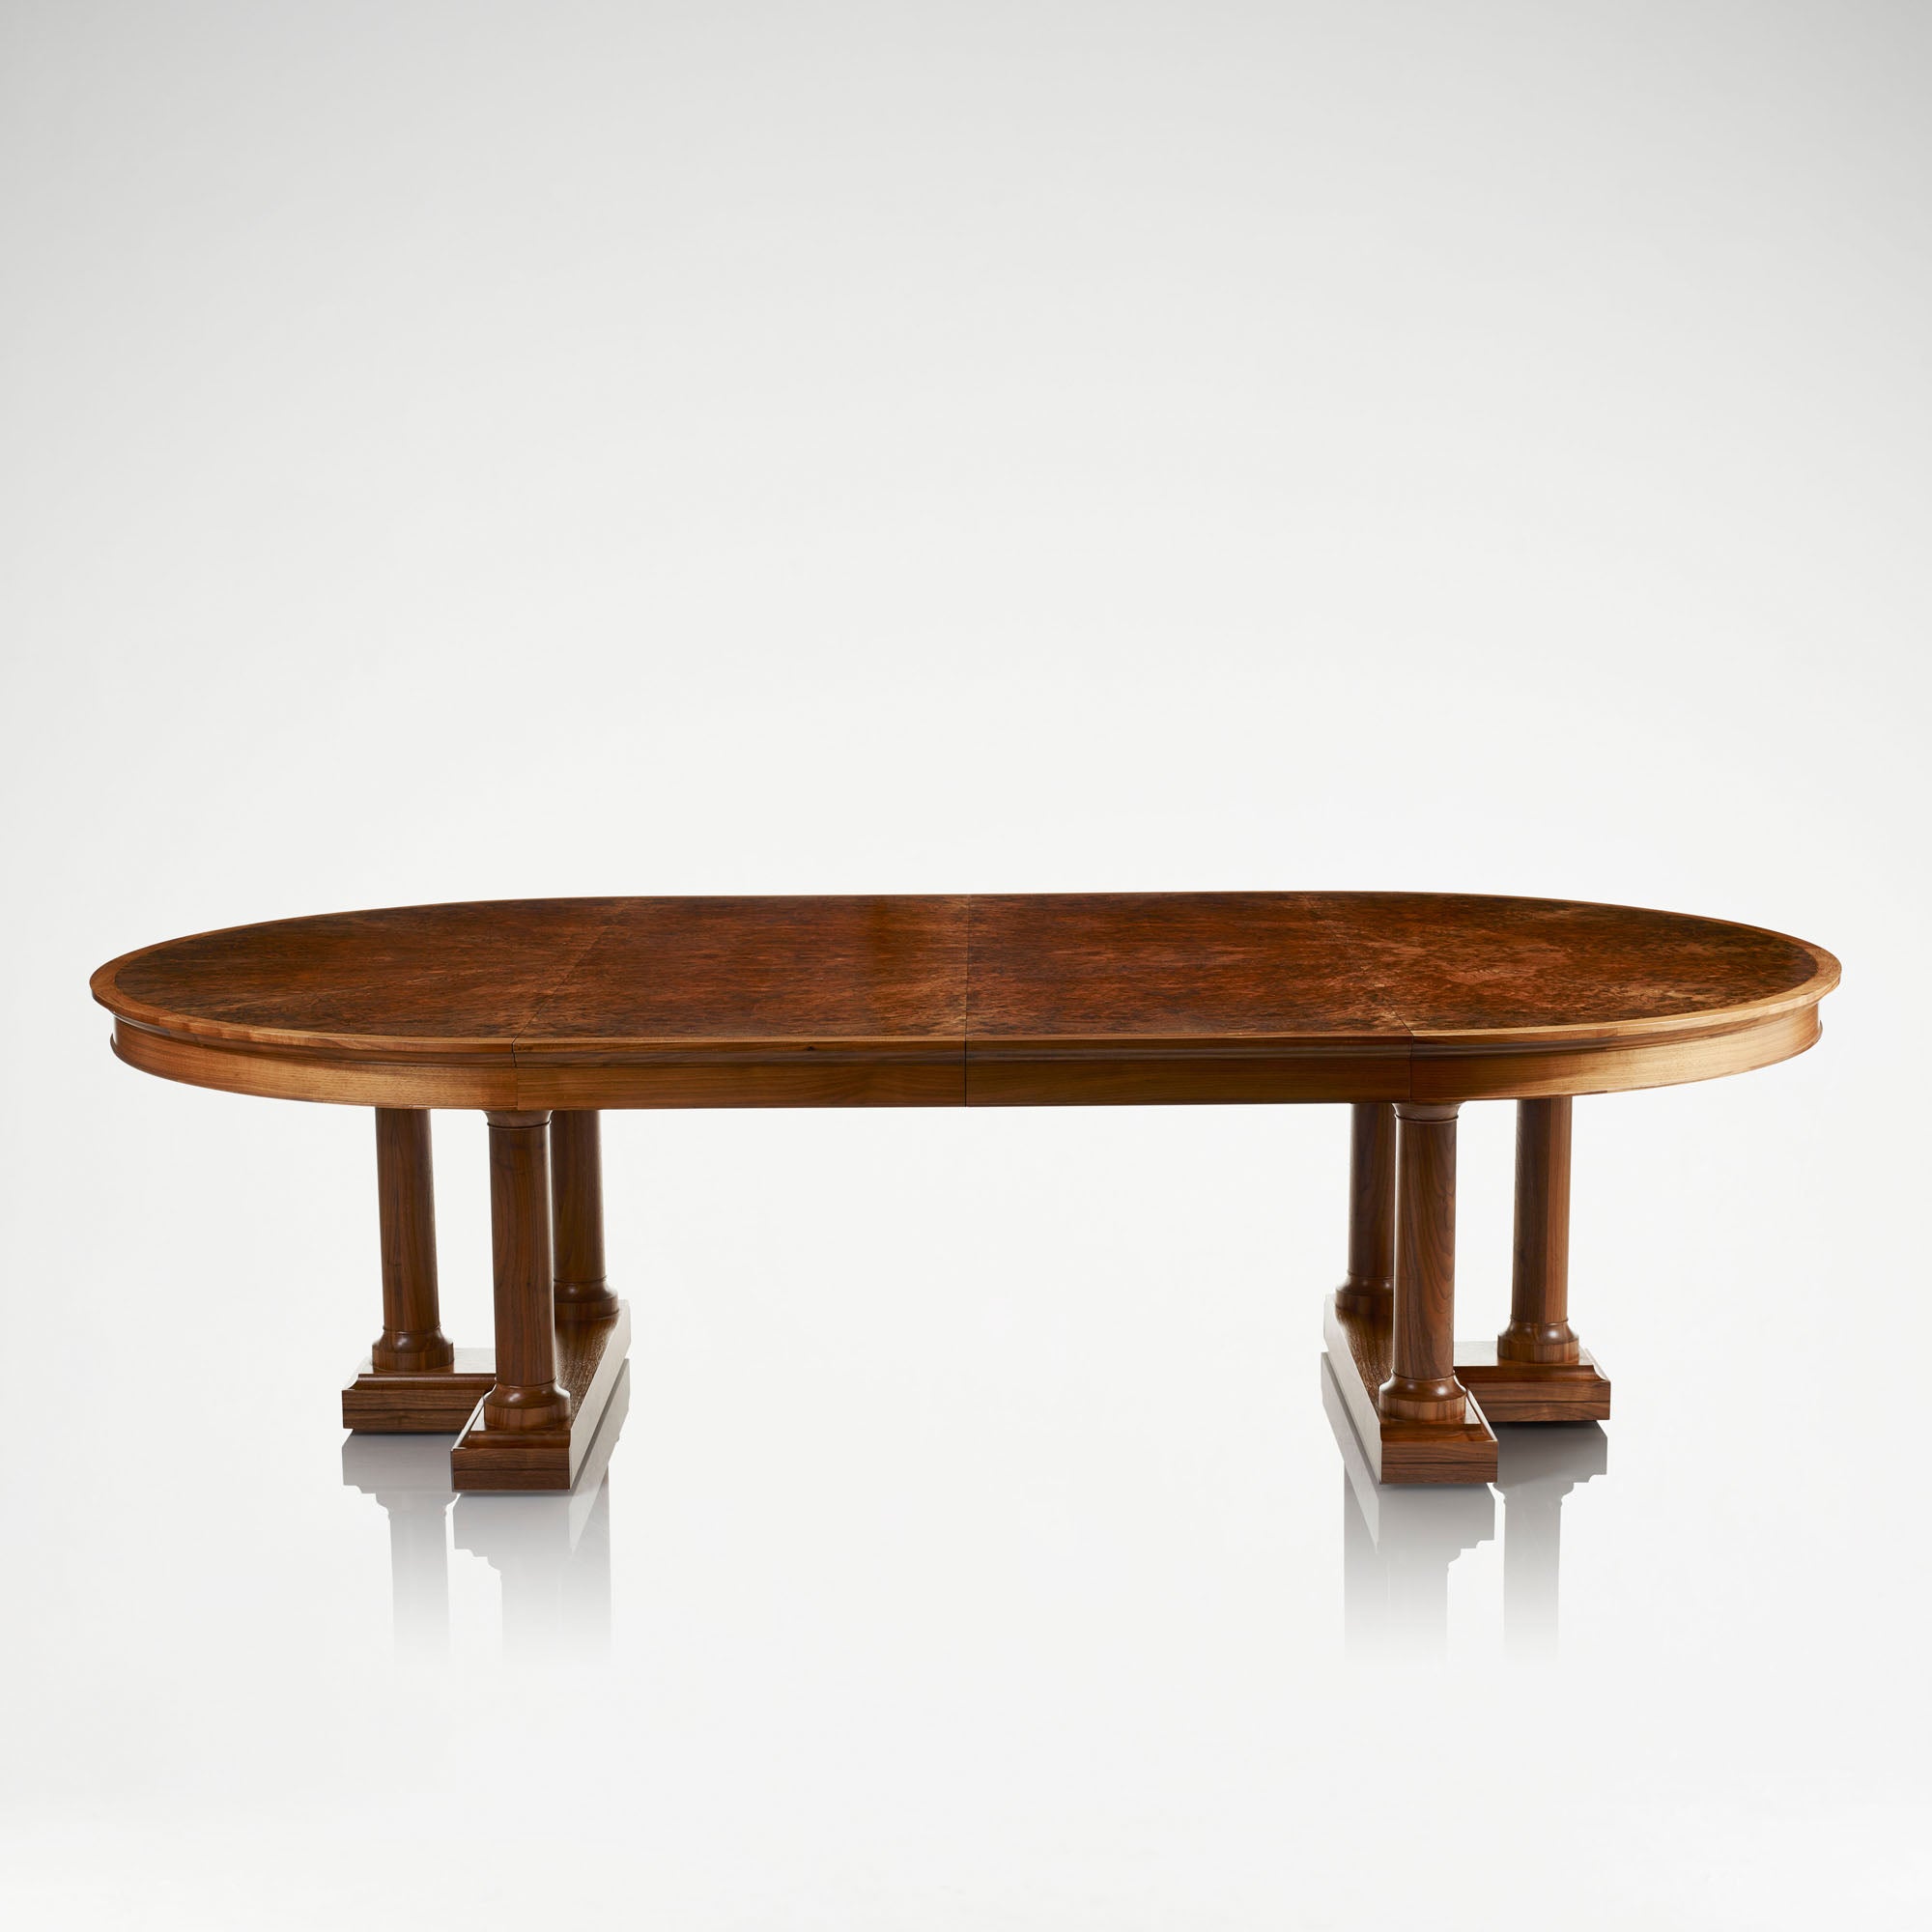 LINLEY Classic Dining Table